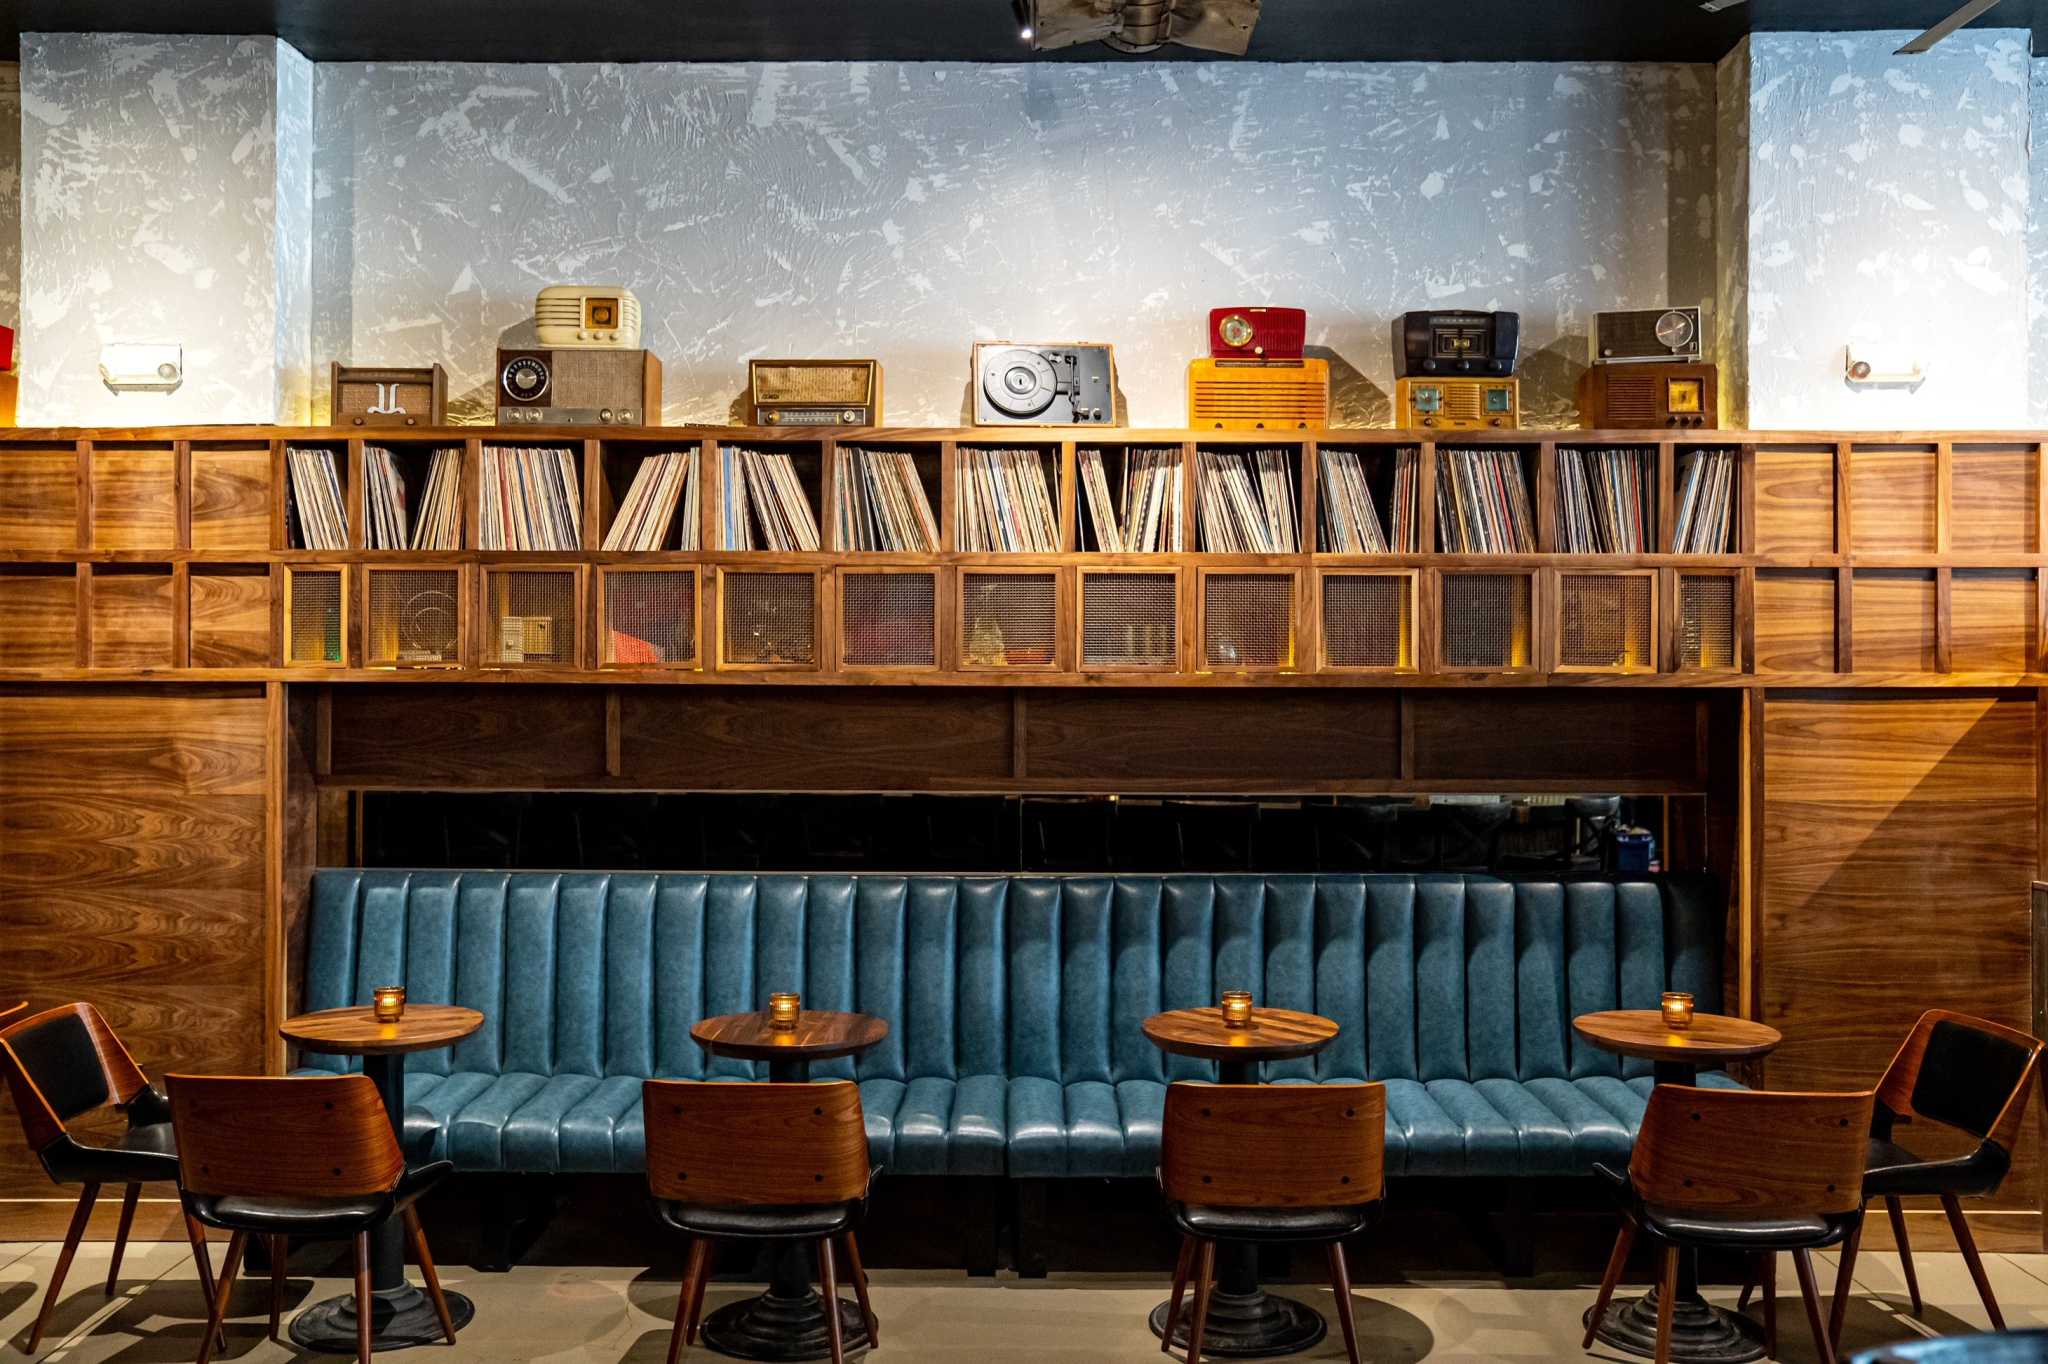 Harlan Records opens with cocktails, vinyl and Japanese touches in downtown S.F.